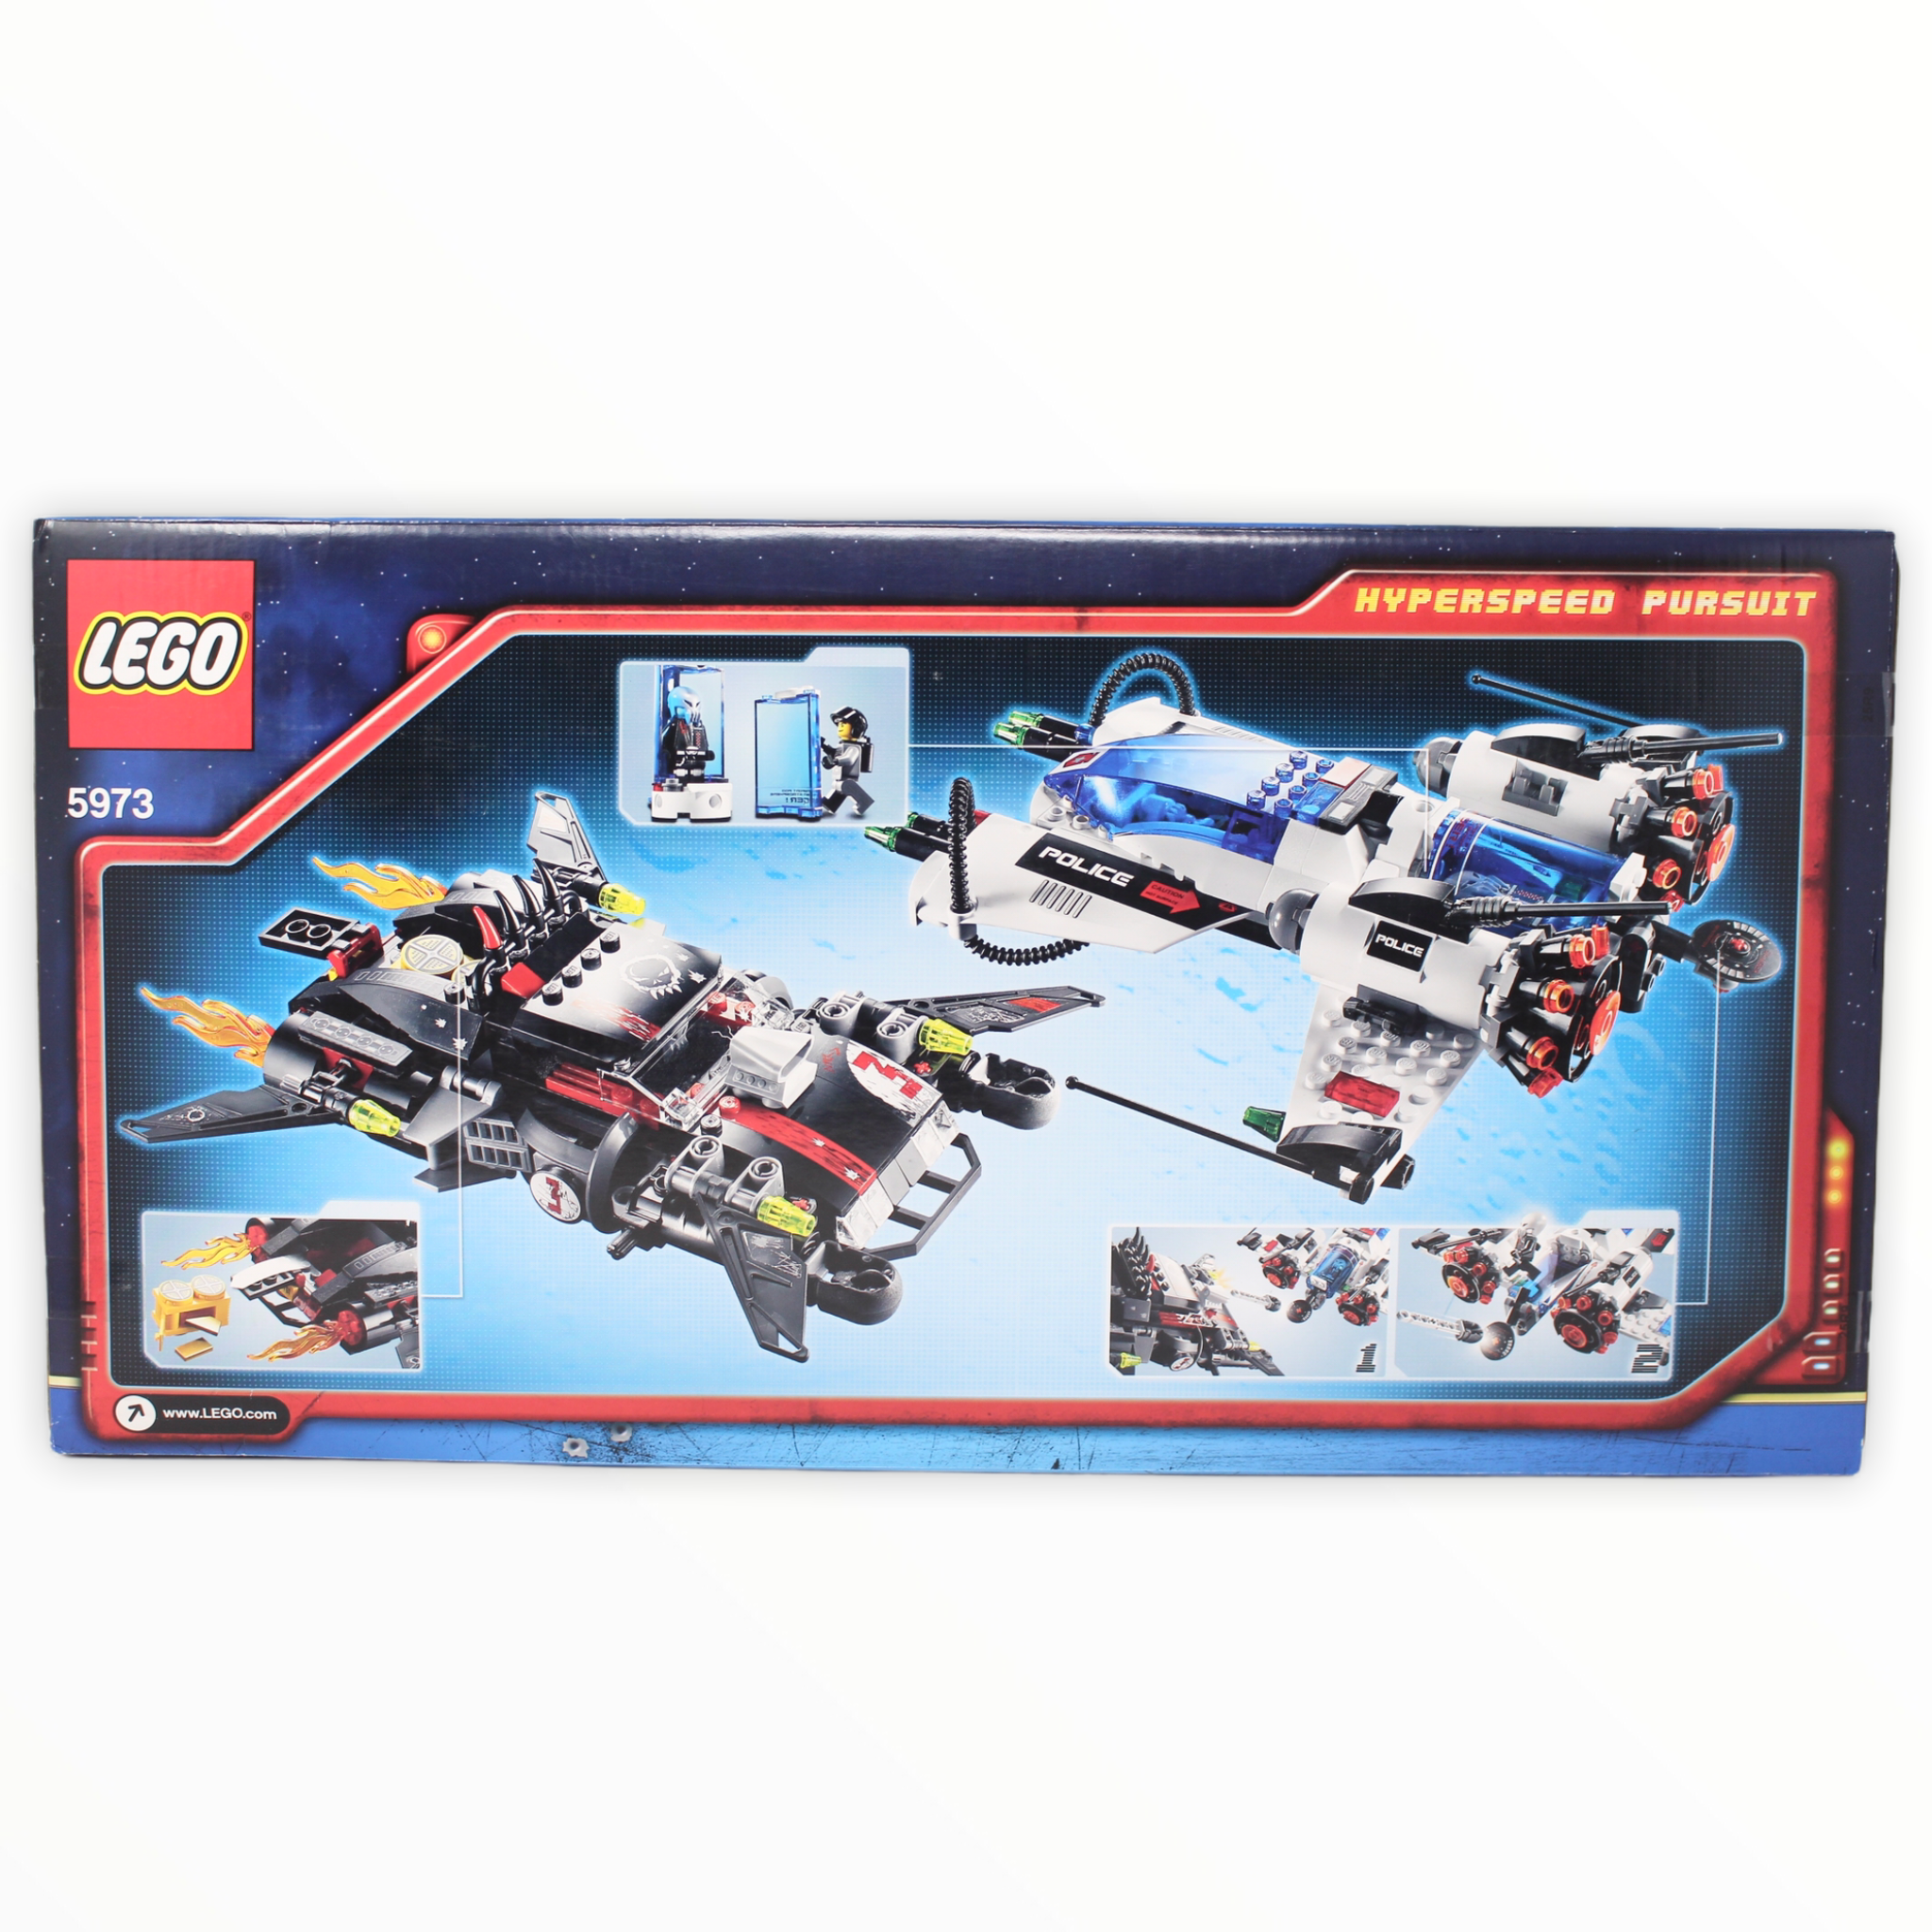 Retired Set 5973 Space Police Hyperspeed Pursuit